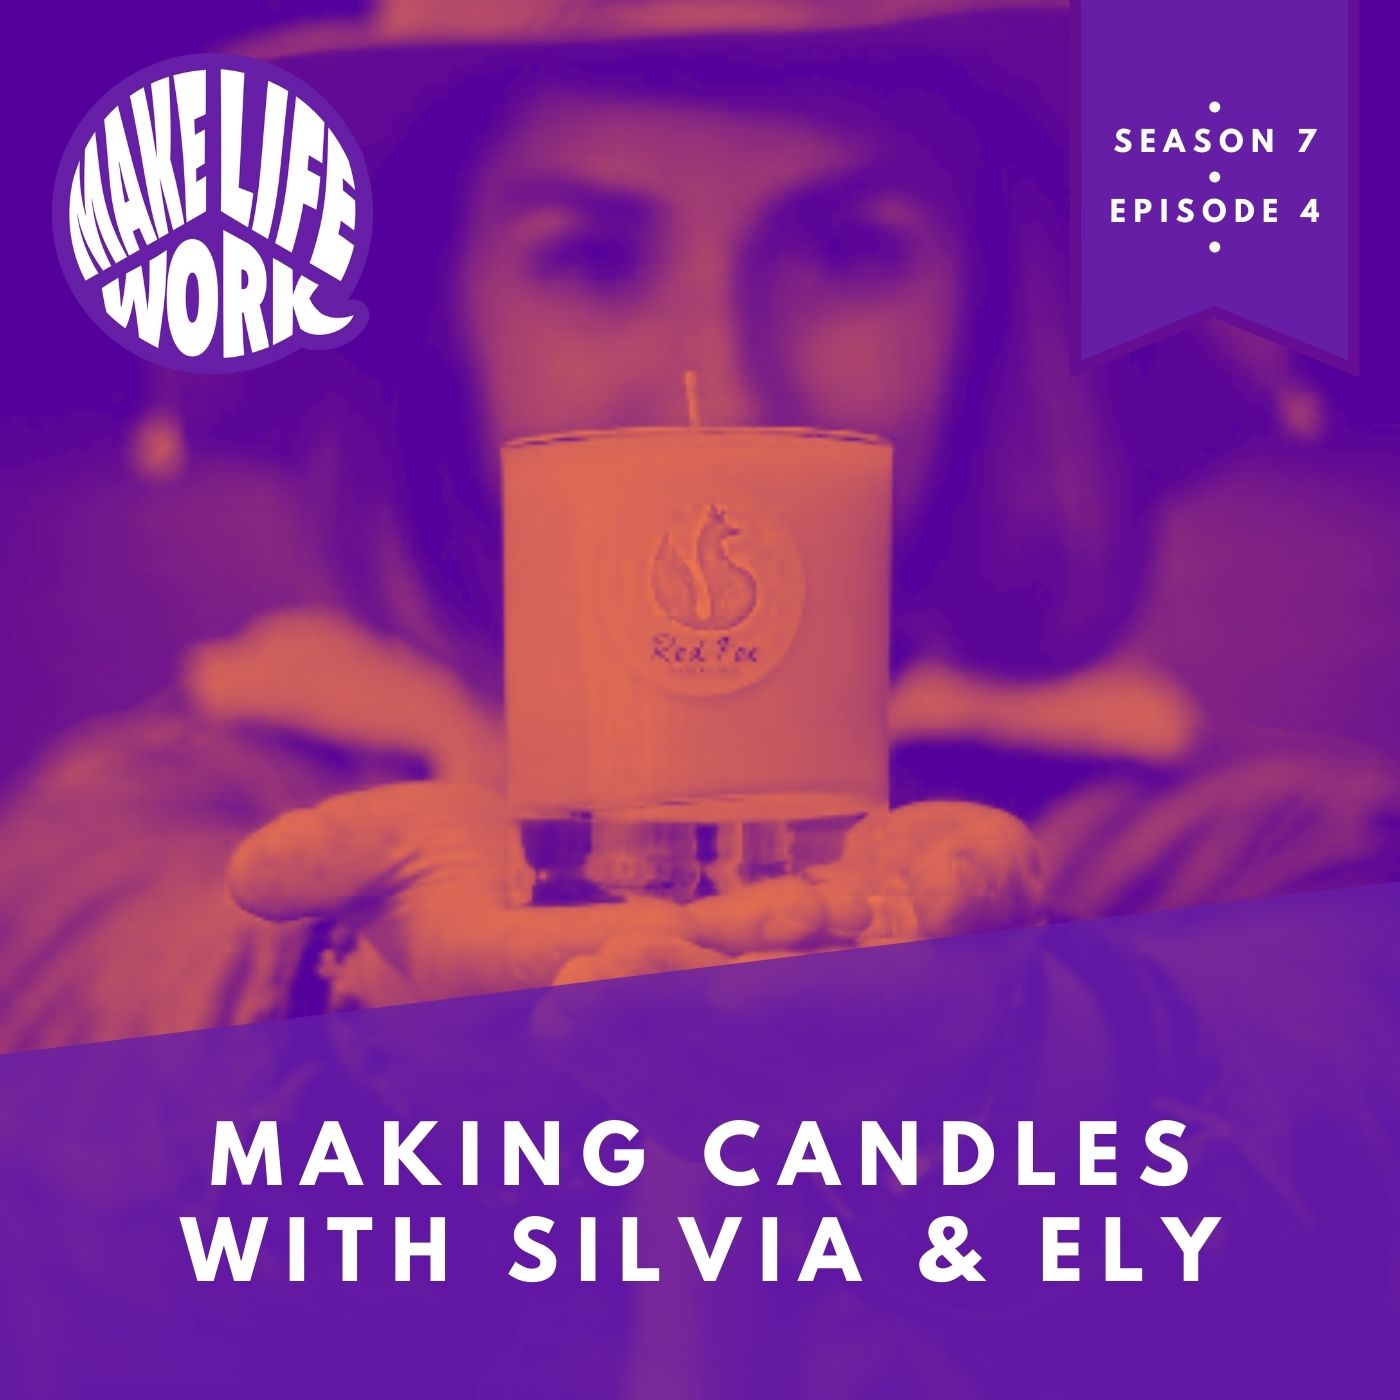 Making candles with Silvia & Ely